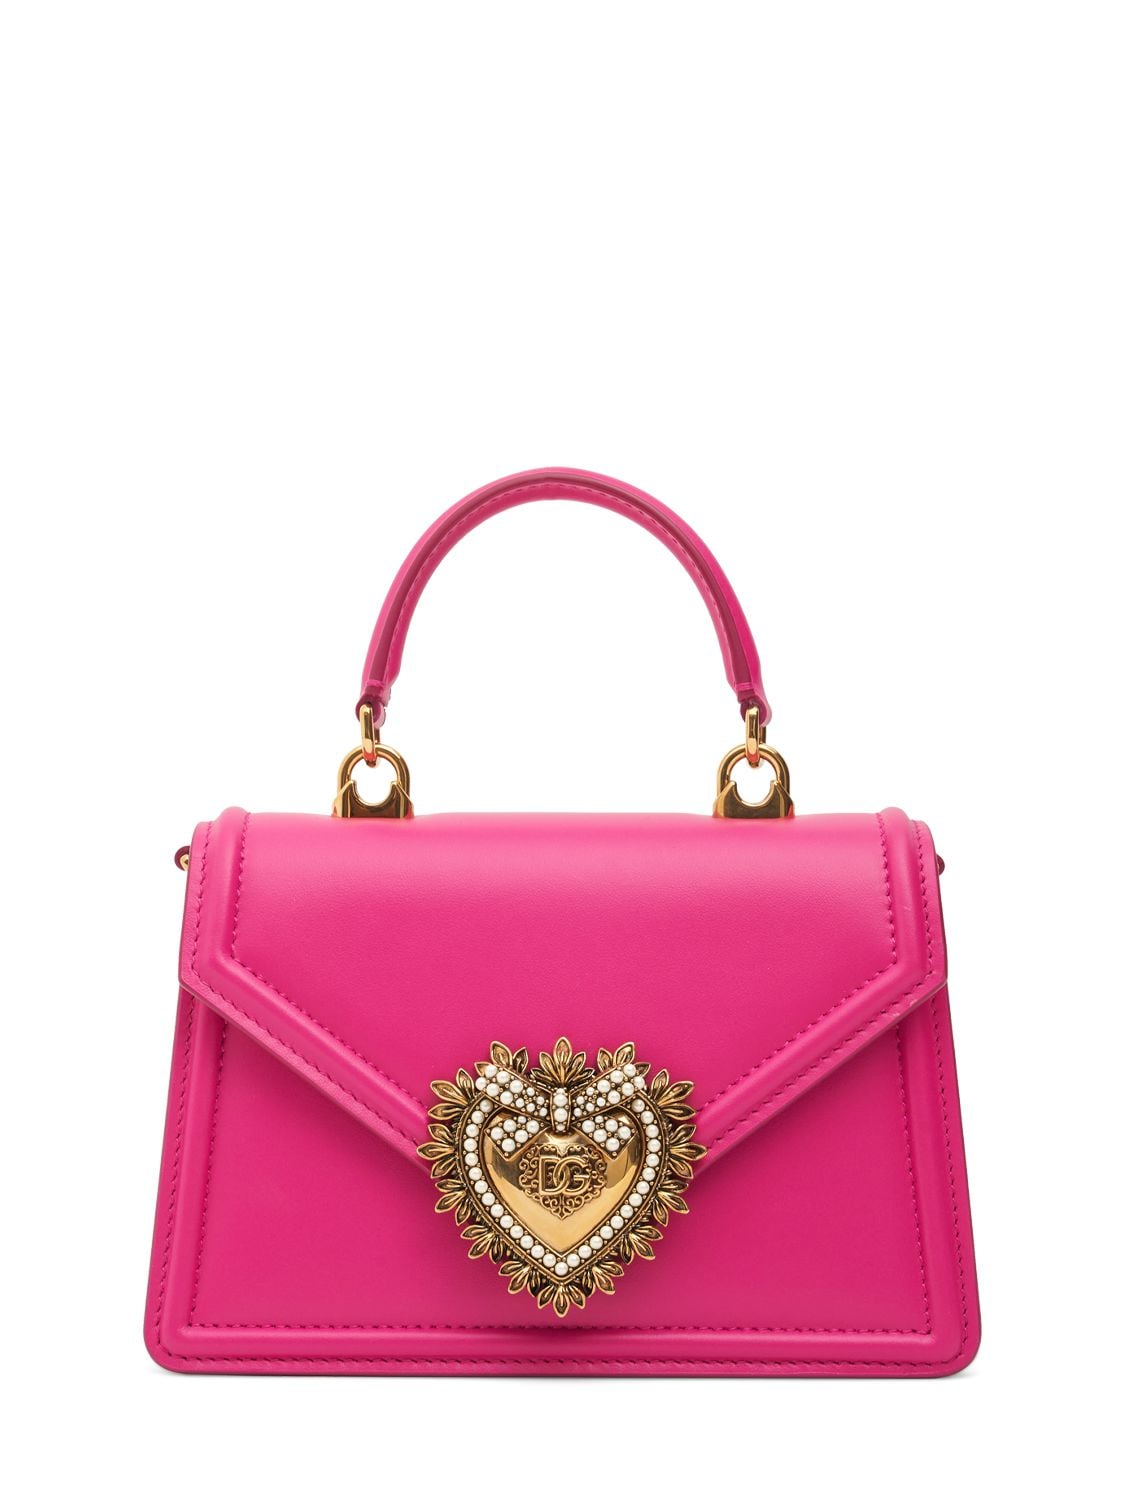 Dolce & Gabbana Mini Devotion Leather Top Handle Bag In Shocking Pink